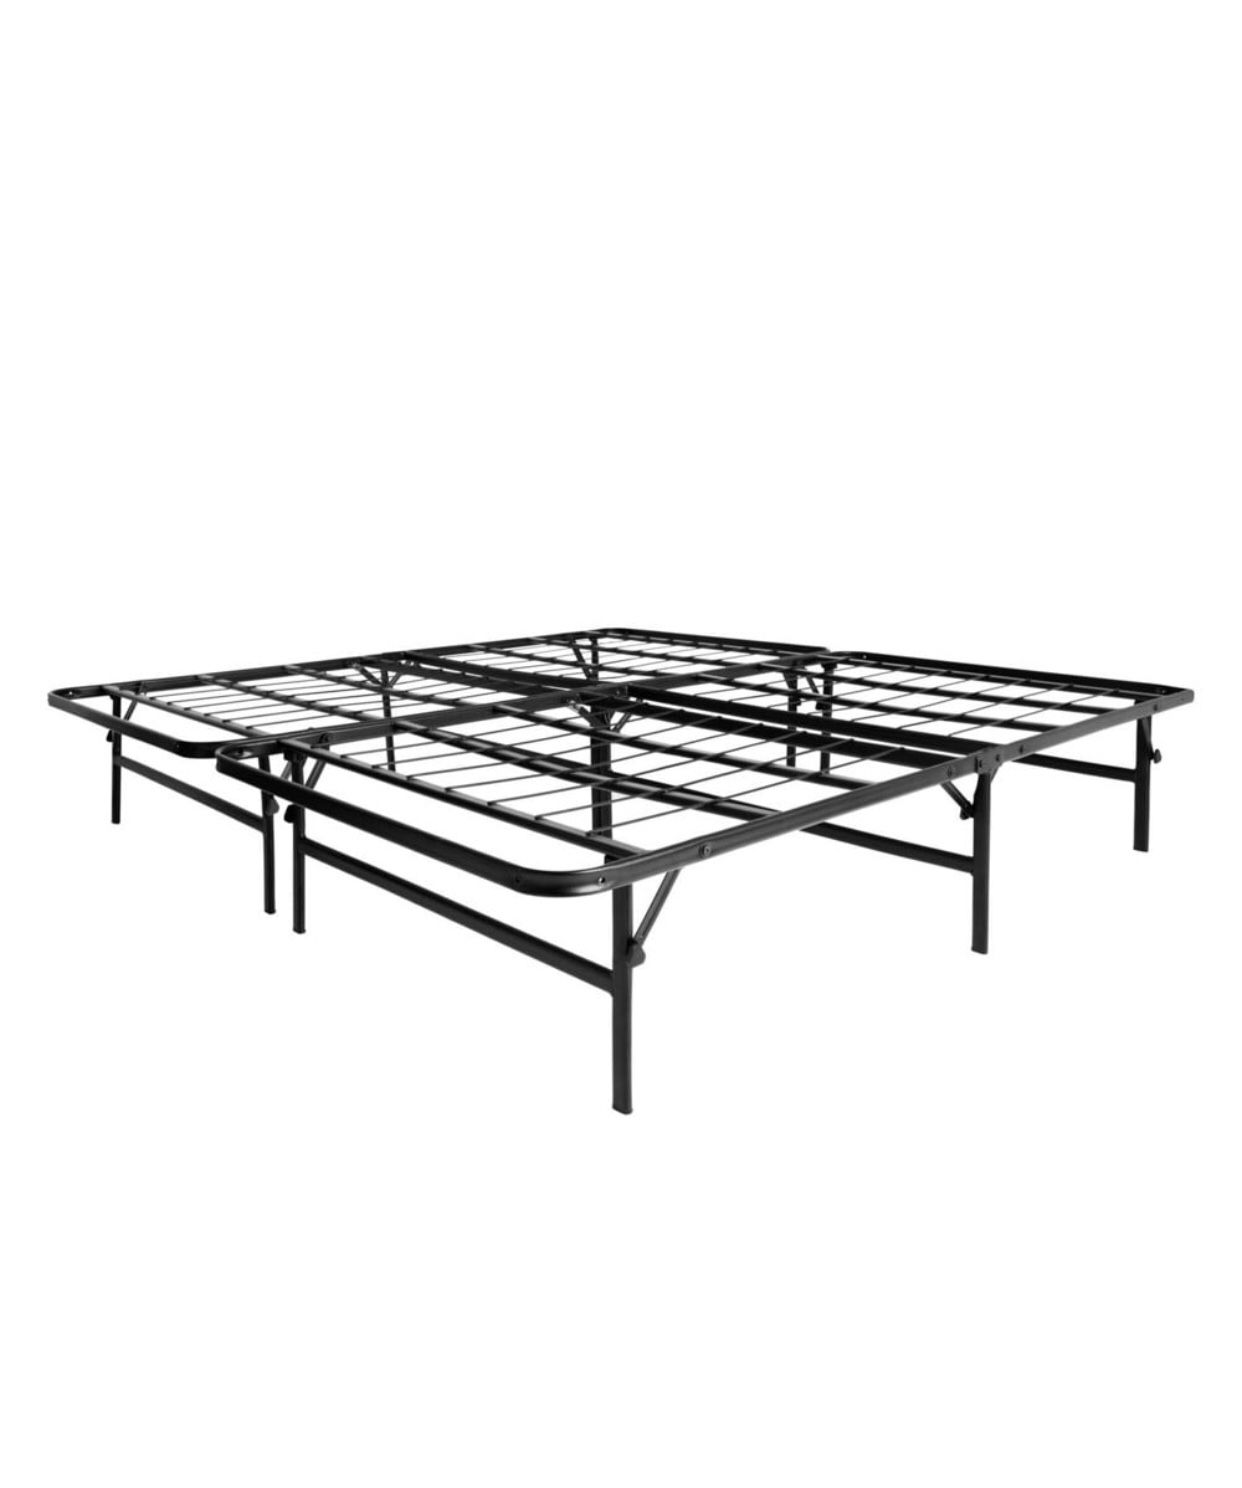 Queen Sized Bed Frame